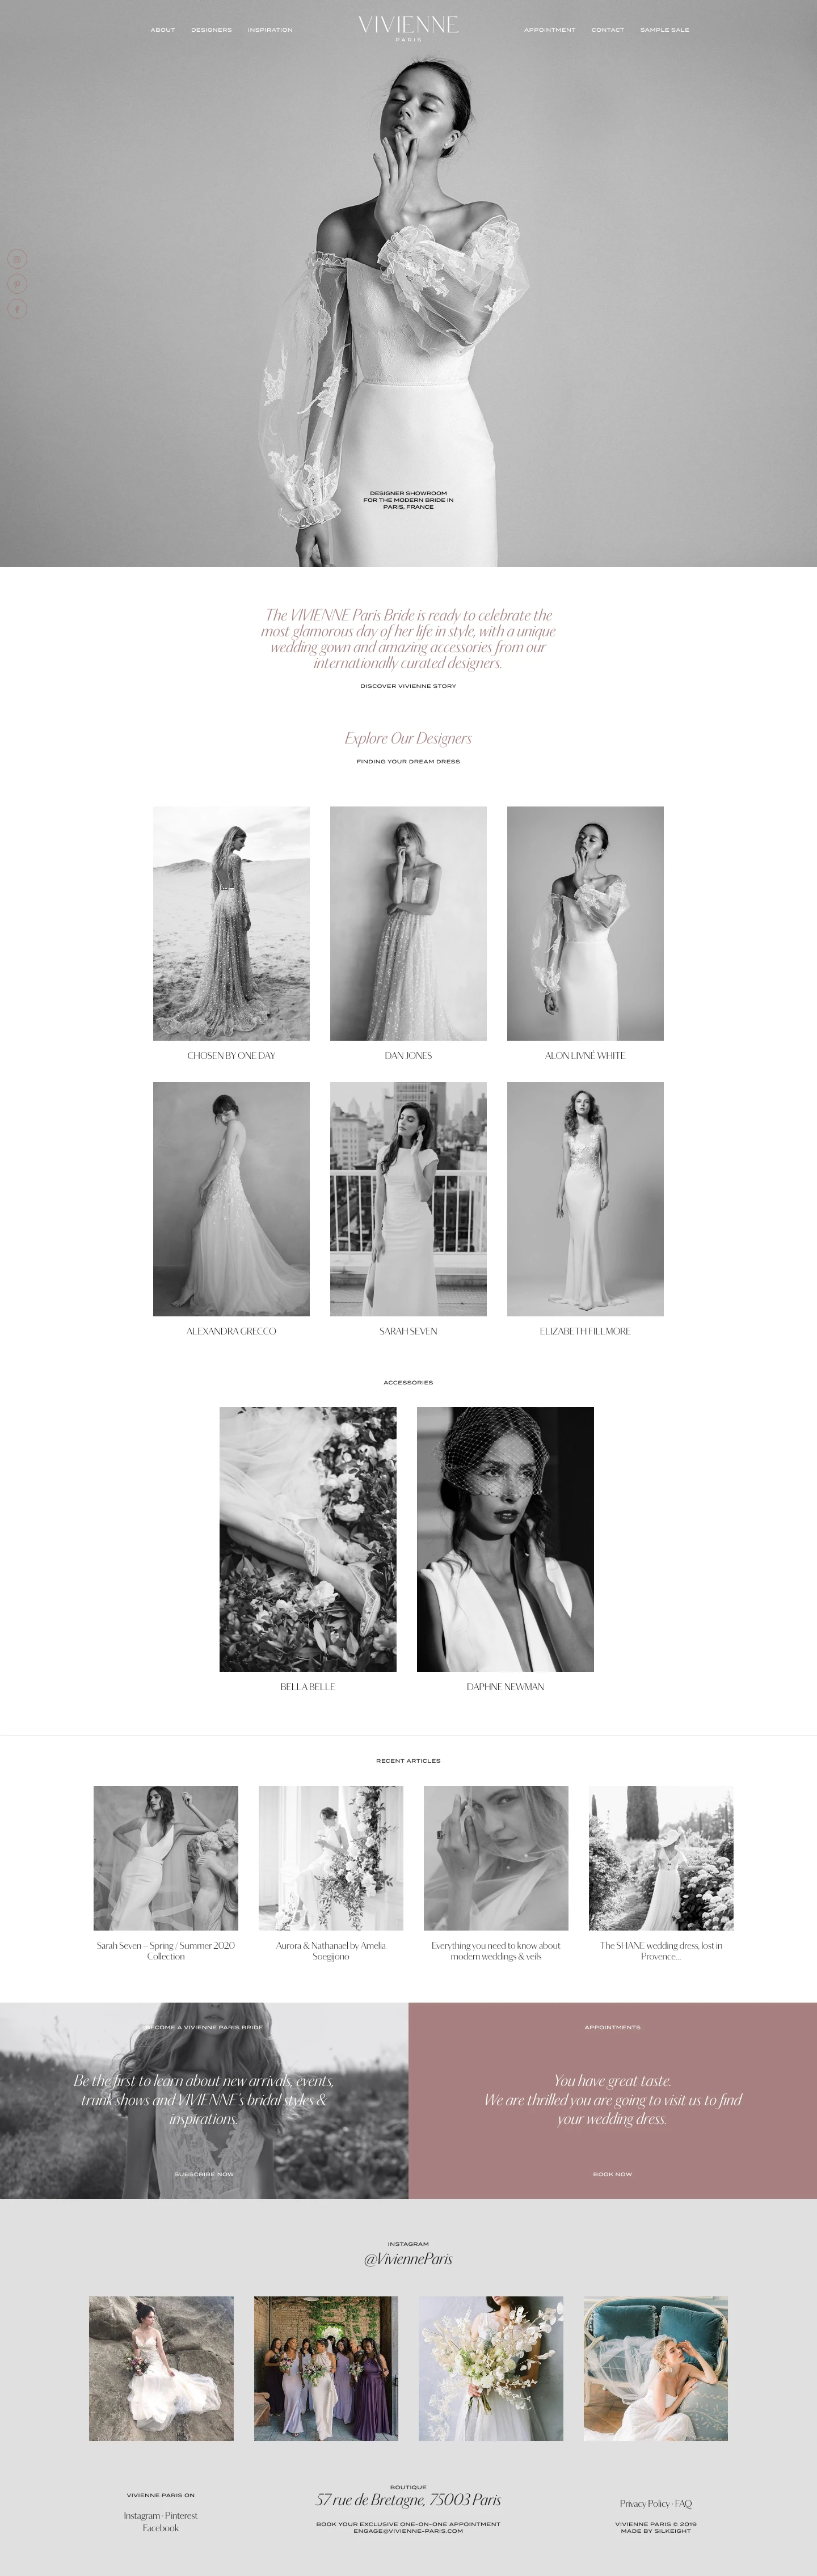 VIVIENNE Paris Bride Landing Page Example: The VIVIENNE Paris Bride is ready to celebrate the most glamorous day of her life in style, with a unique wedding gown and amazing accessories from our internationally curated designers.